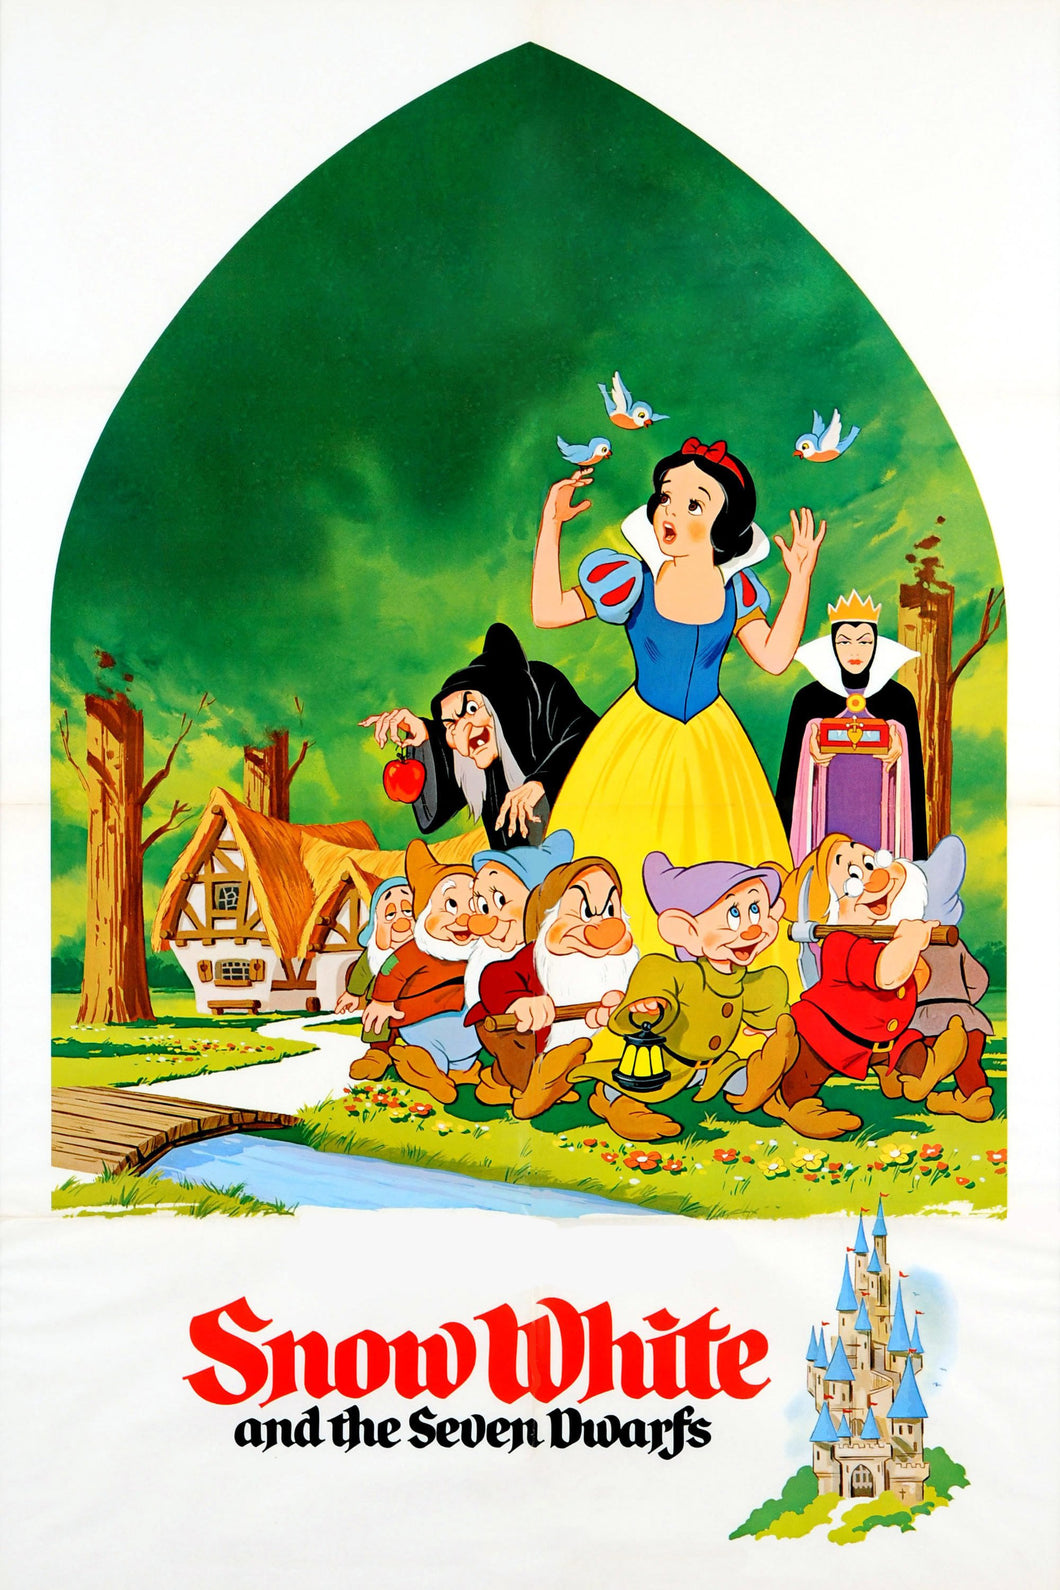 Snow White And The Seven Dwarfs (1937) Animated Movie Poster Framed or Unframed Glossy Poster Free UK Shipping!!!